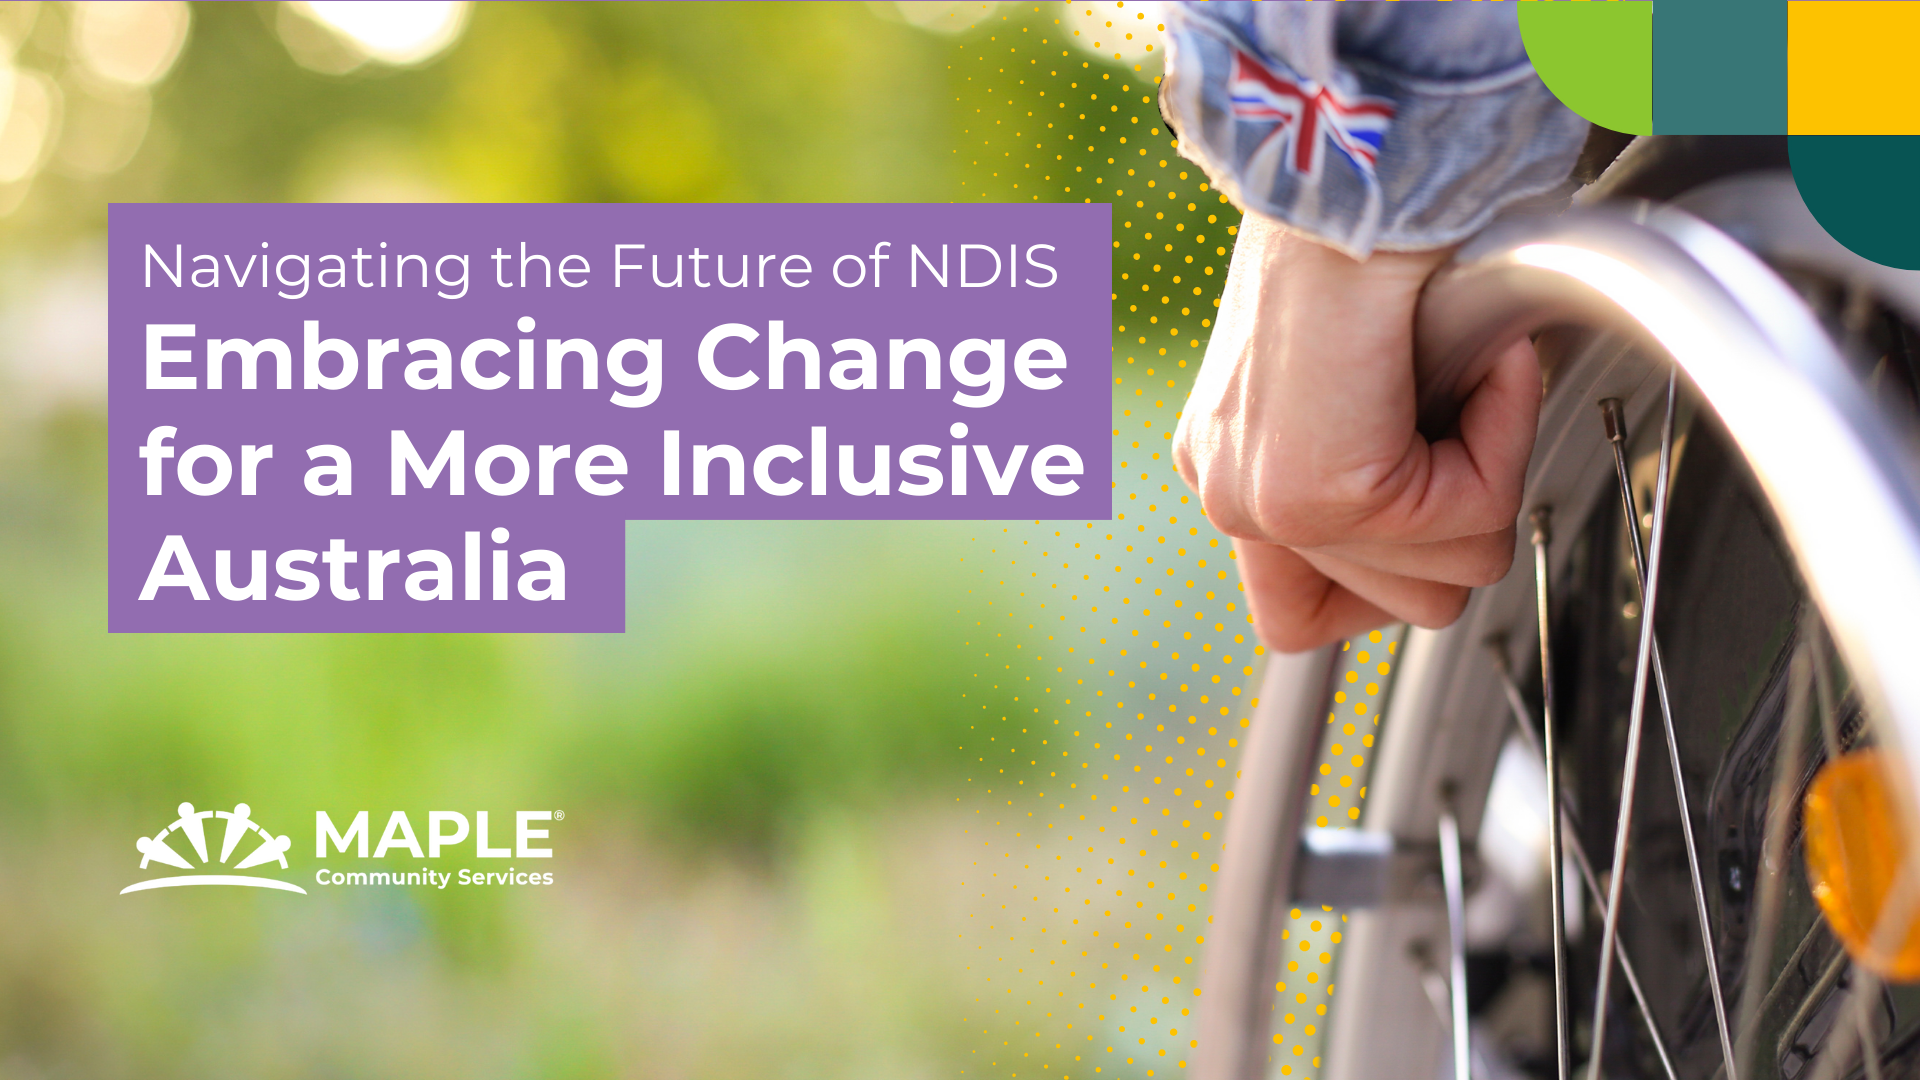 Navigating the Future of NDIS: Embracing Change for a More Inclusive Australia